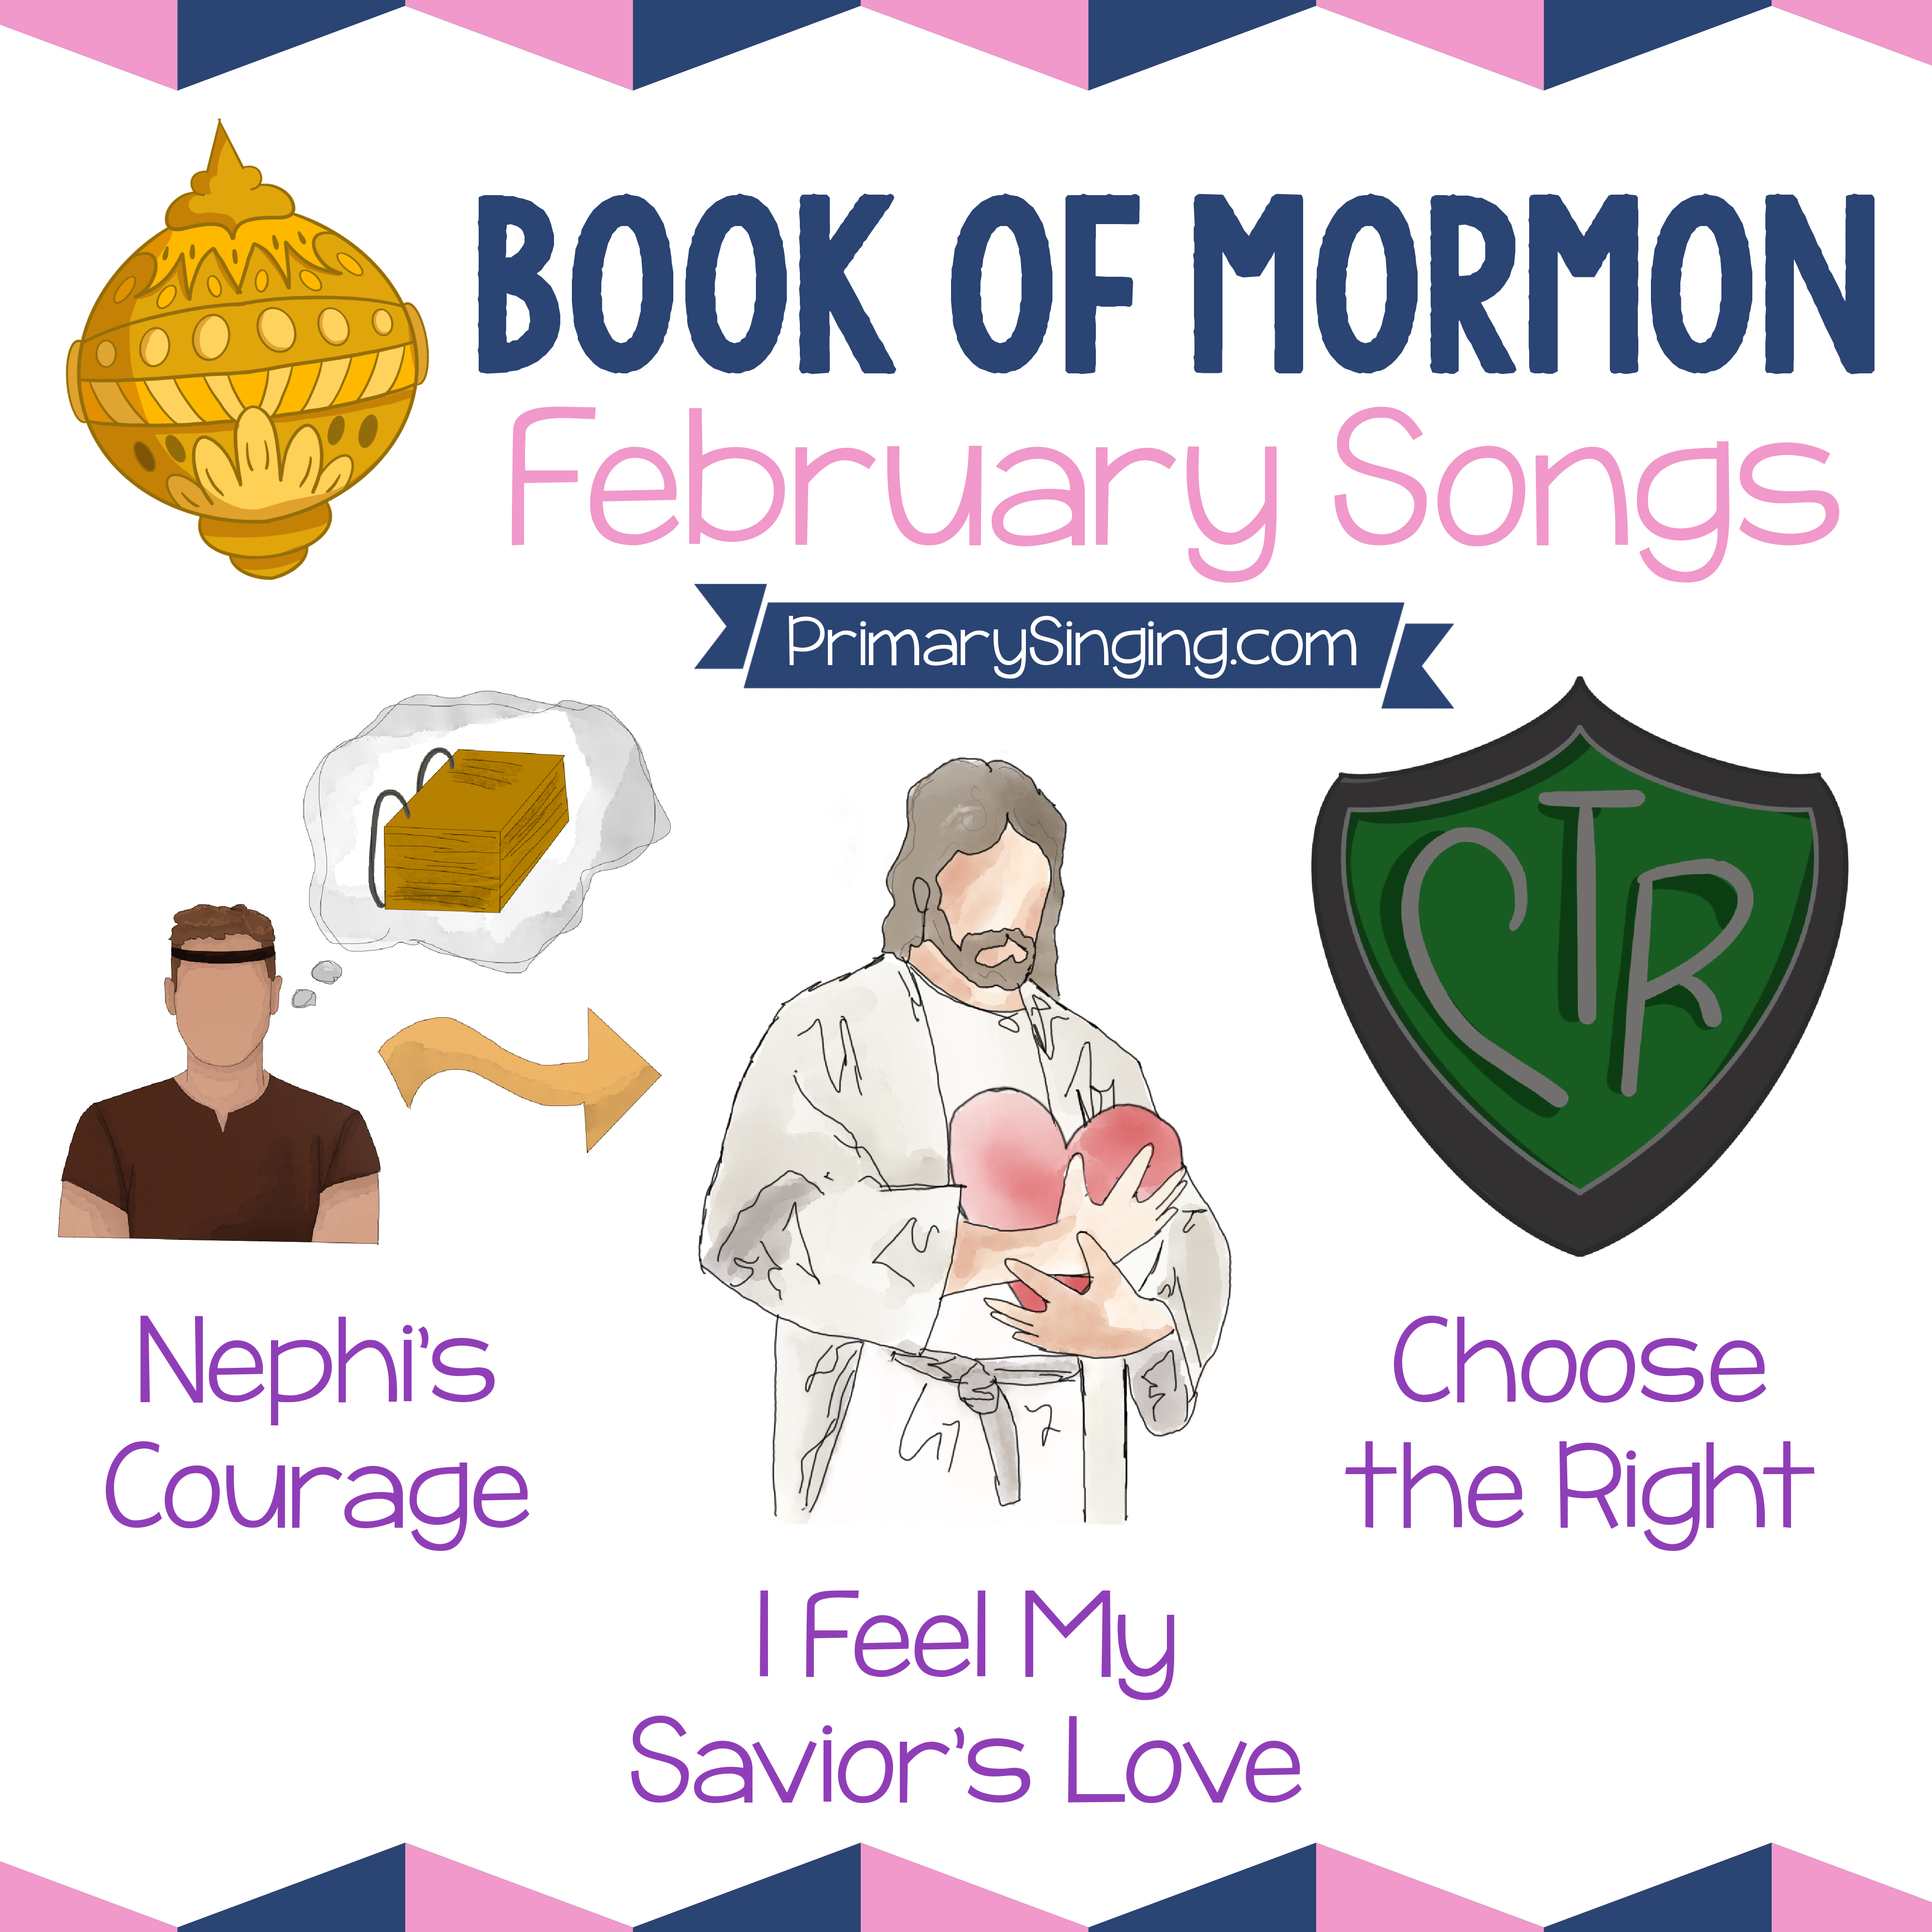 Book of Mormon February Song List - Nephi's Courage, I Feel My Savior's Love, and Choose the Right. Teach these 3 great Primary songs during Singing Time or home Come Follow Me lessons.